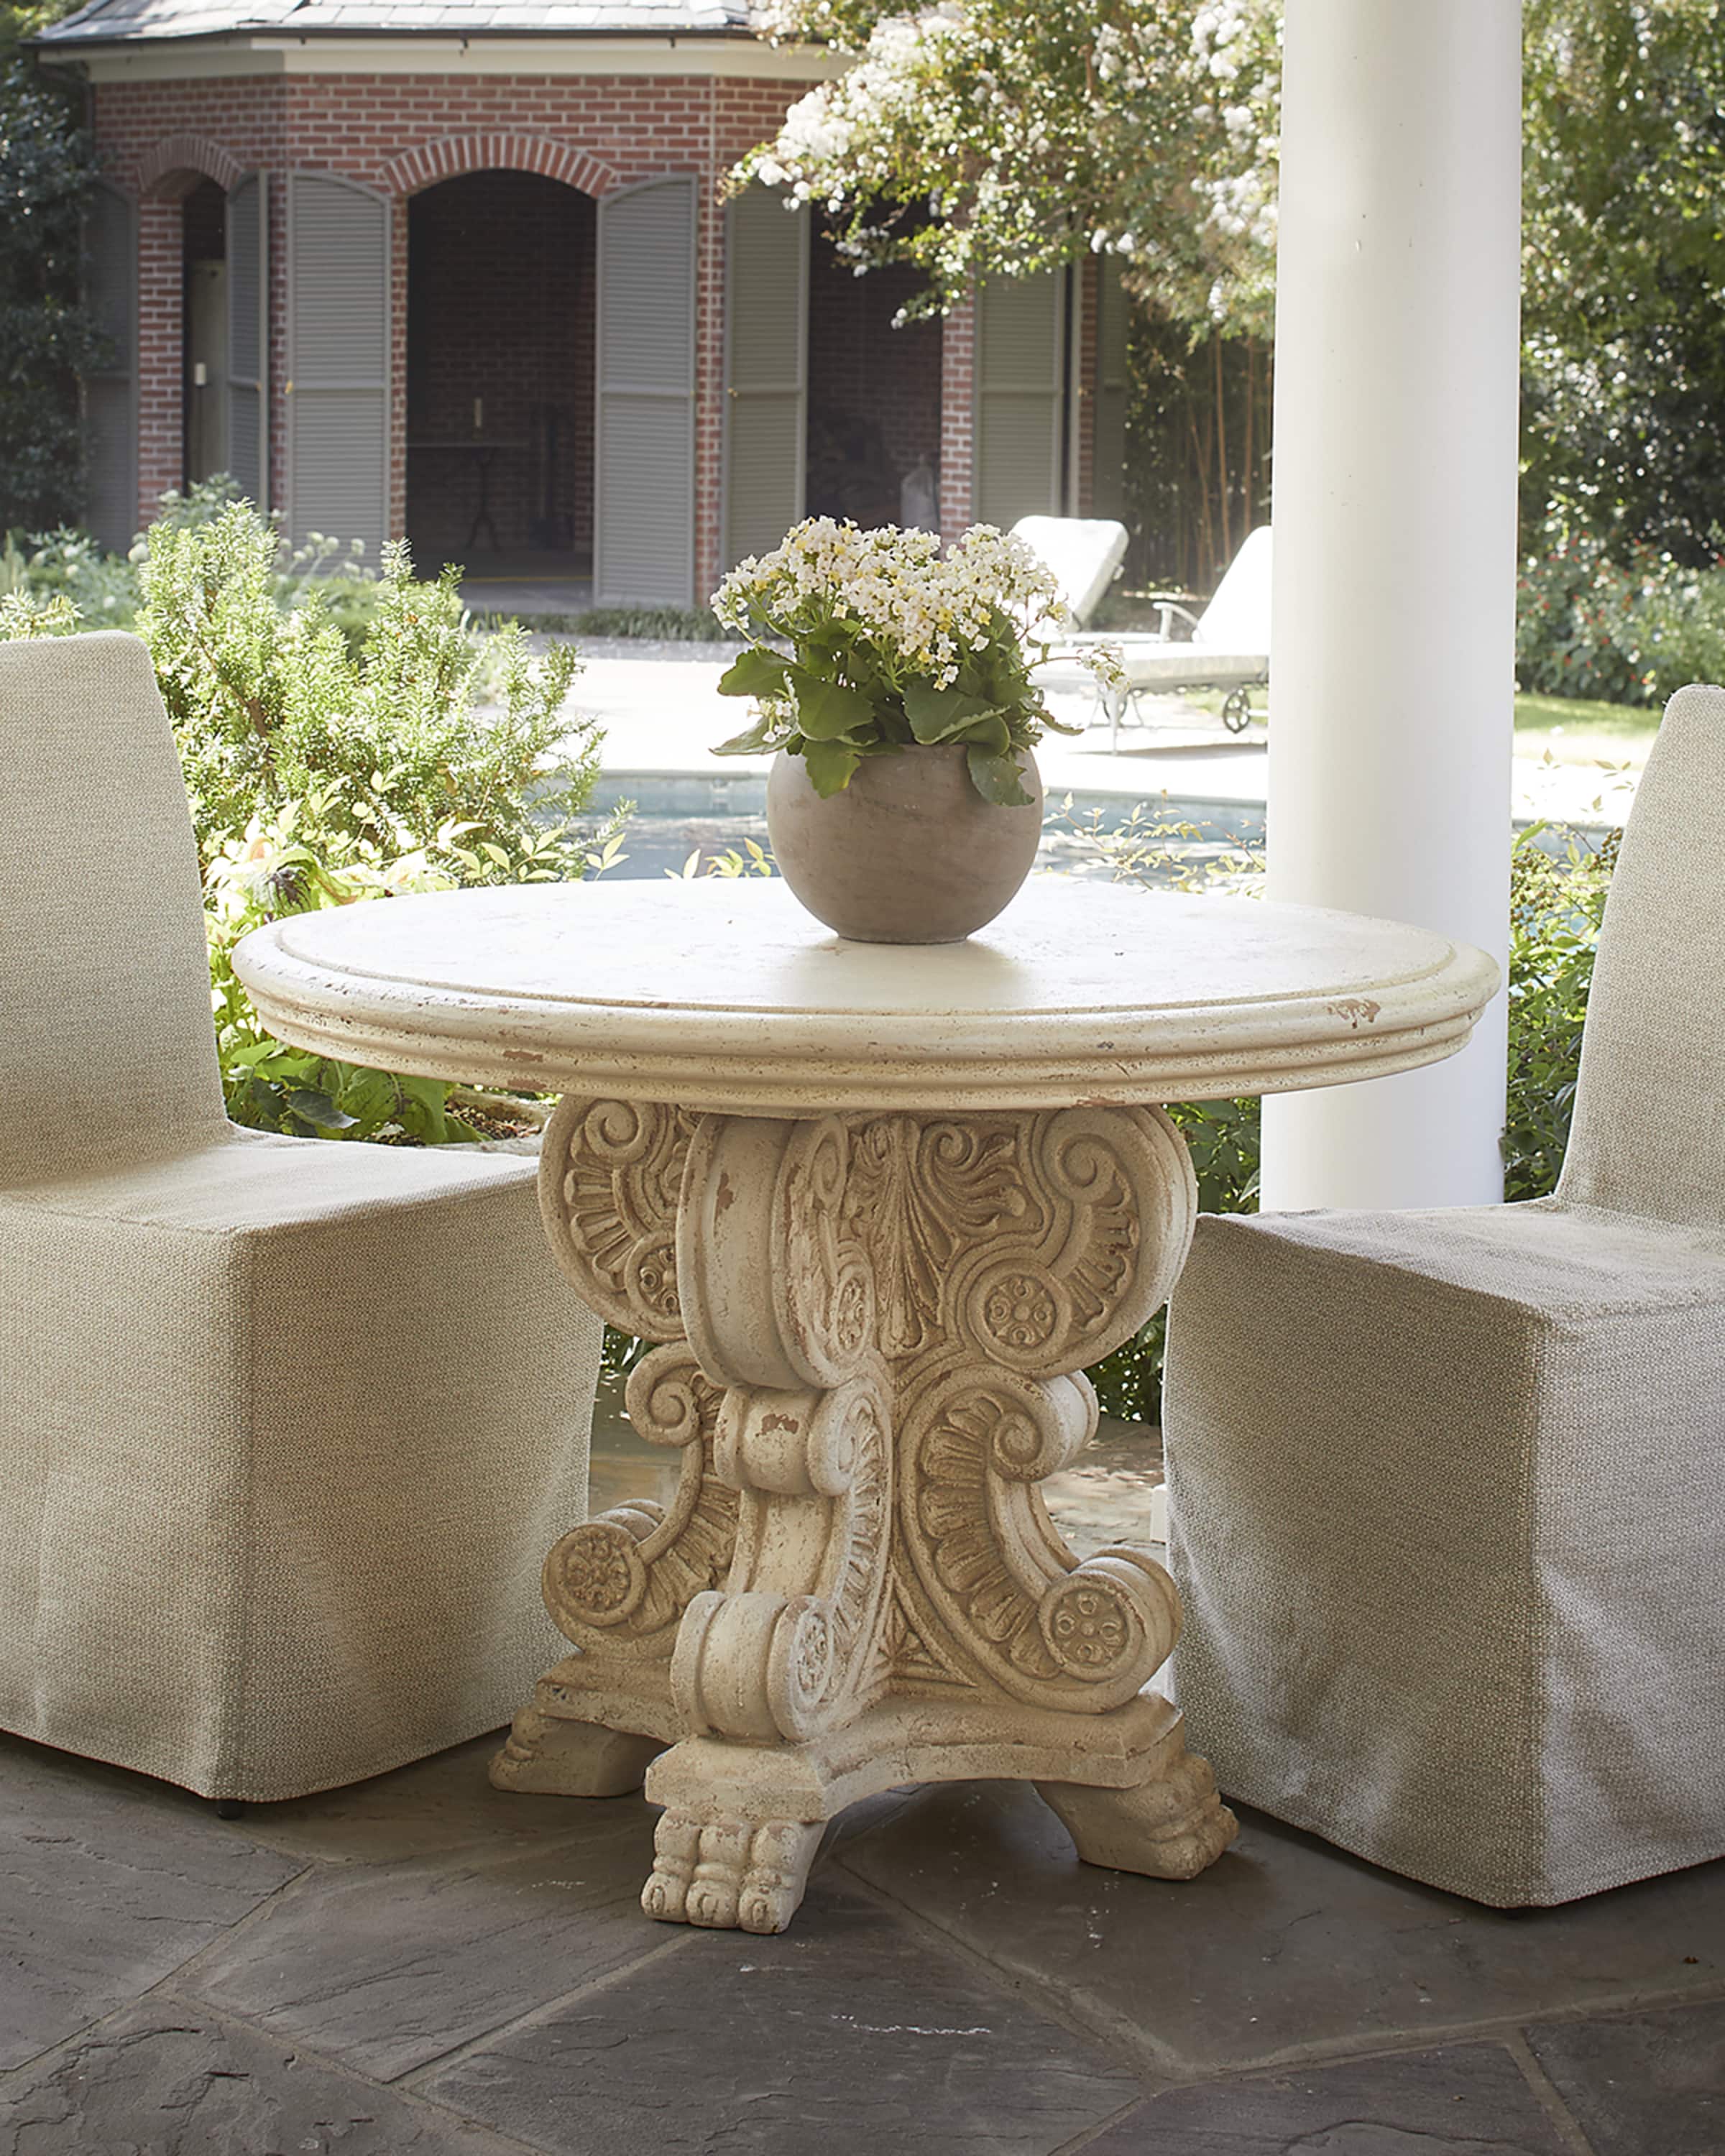 42" Scrollwork Outdoor Dining Table